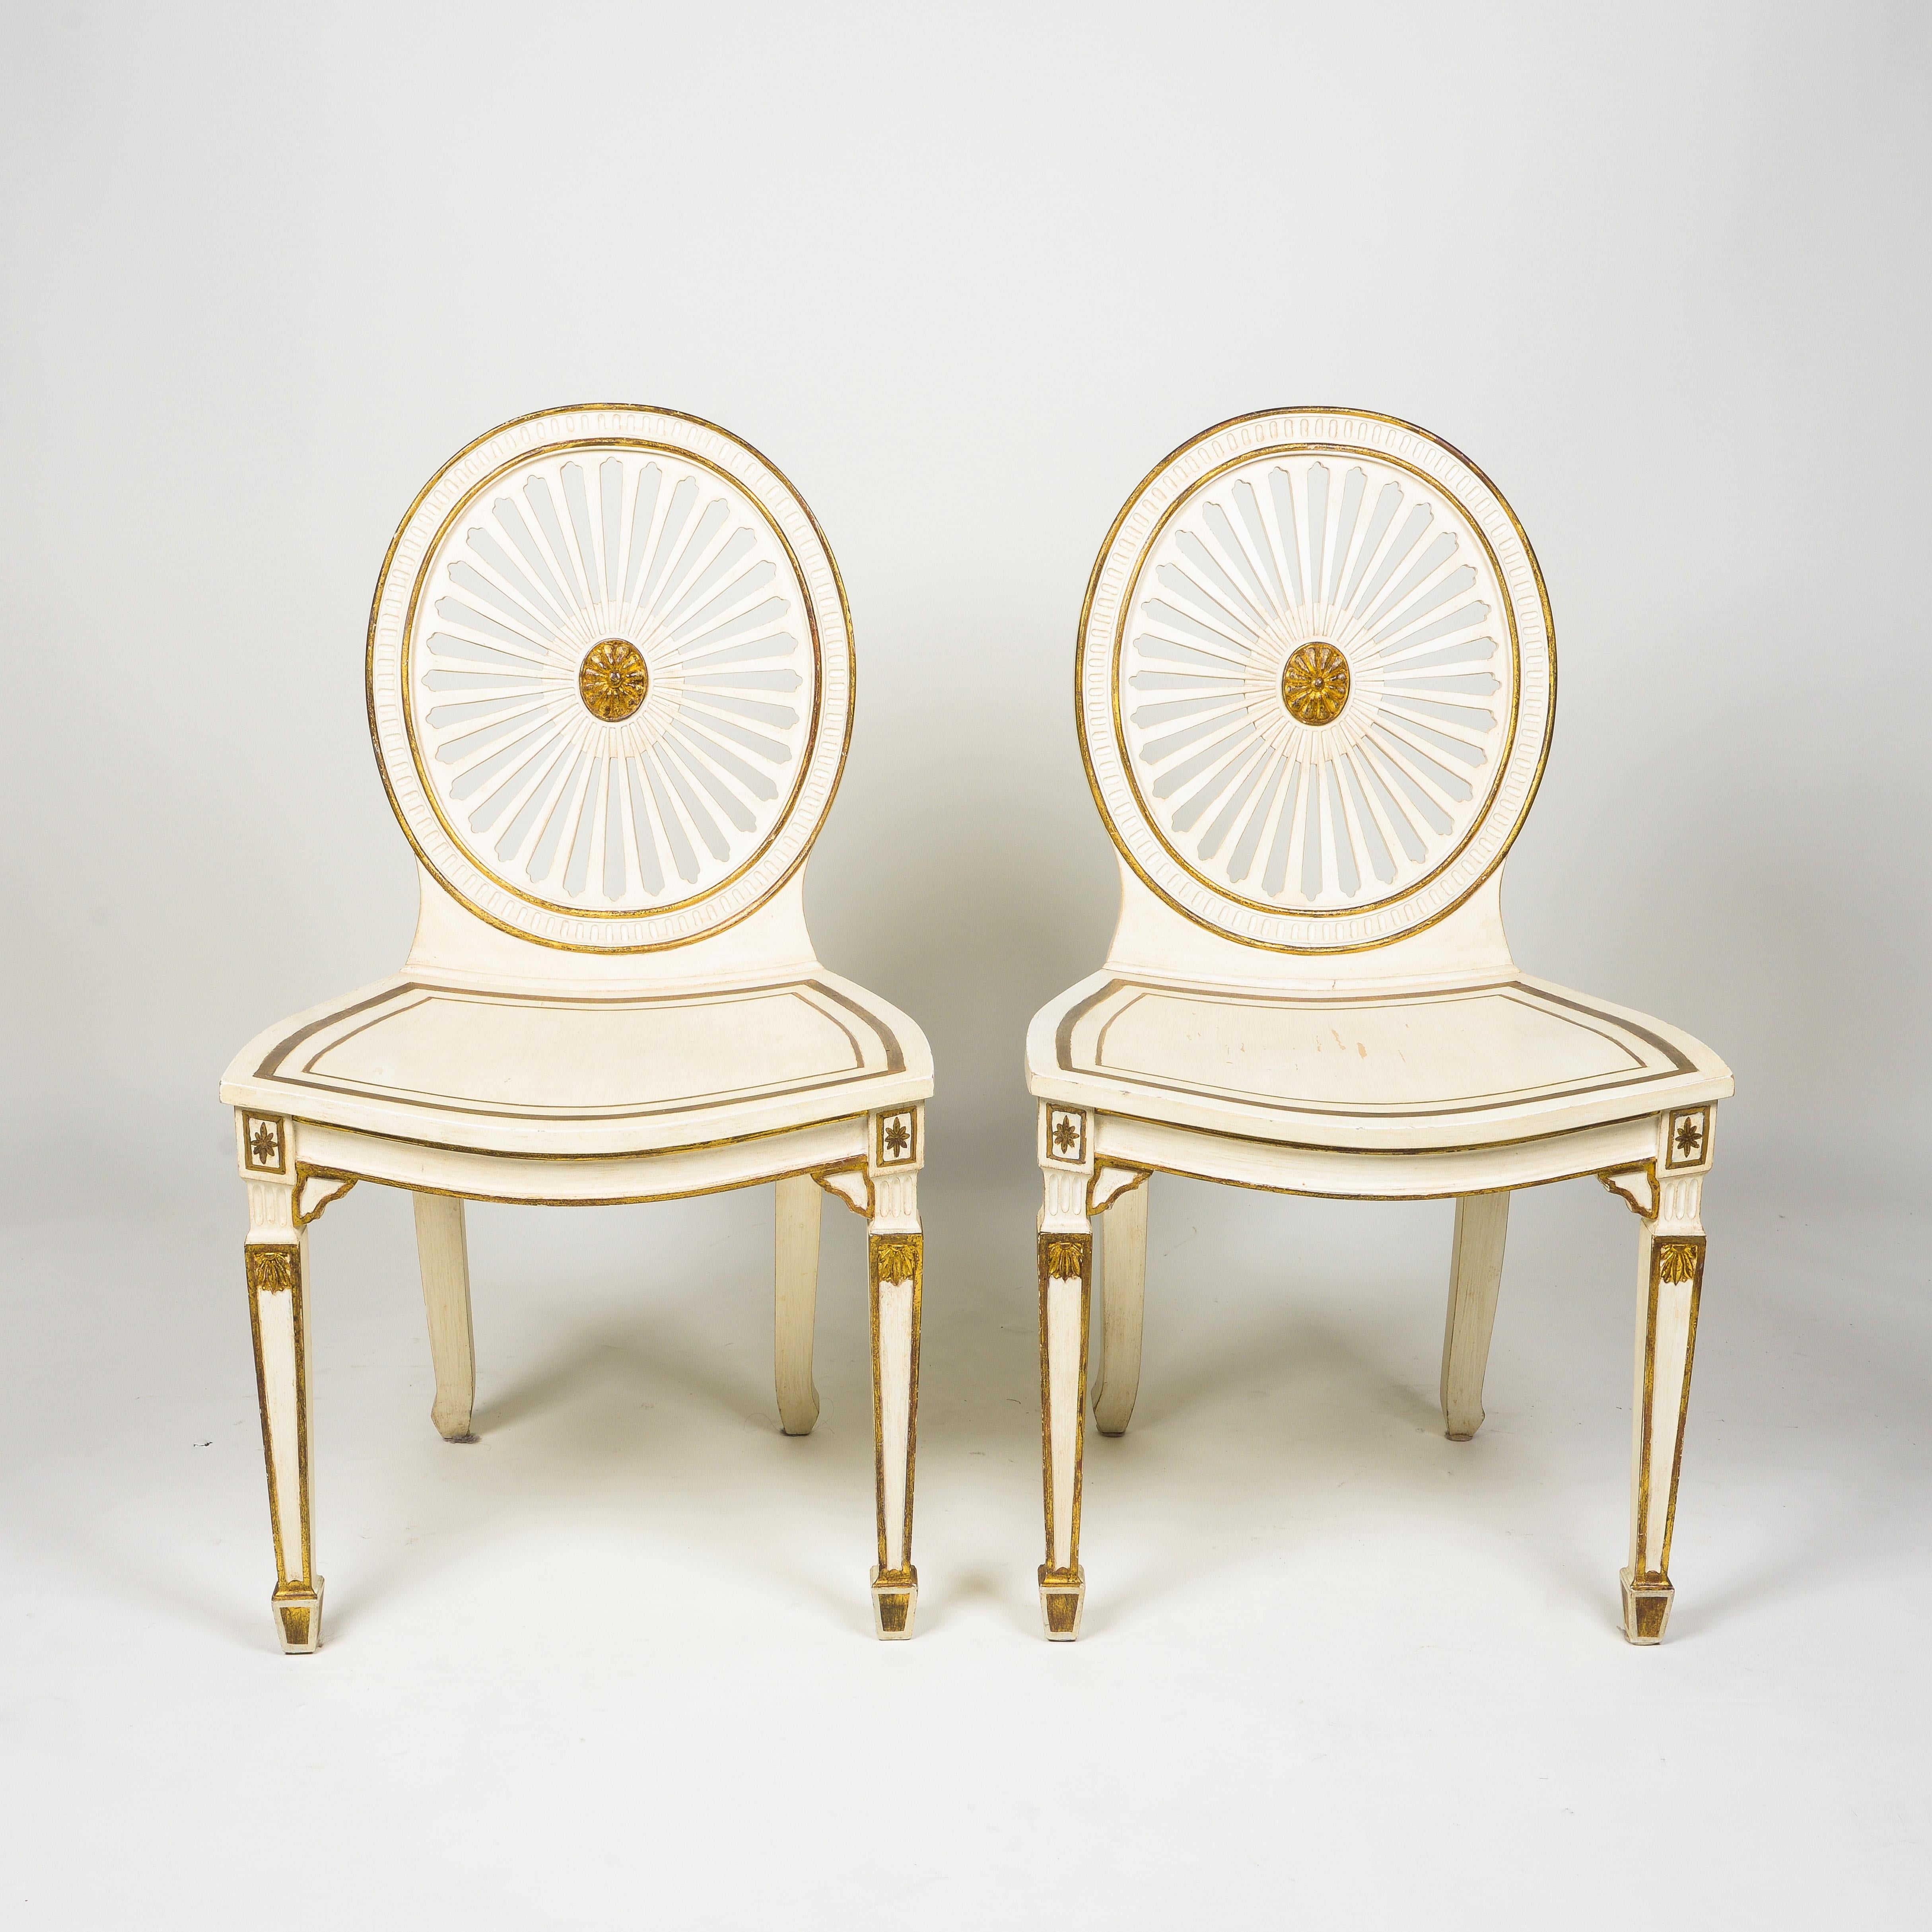 Each with an oval back in the form of a pierced fan paterae centered by a gilt floral roundel and edged in gilt; the dished seat with gilt banding raised on front square tapering legs headed by stop-fluting and painted floral roundels and